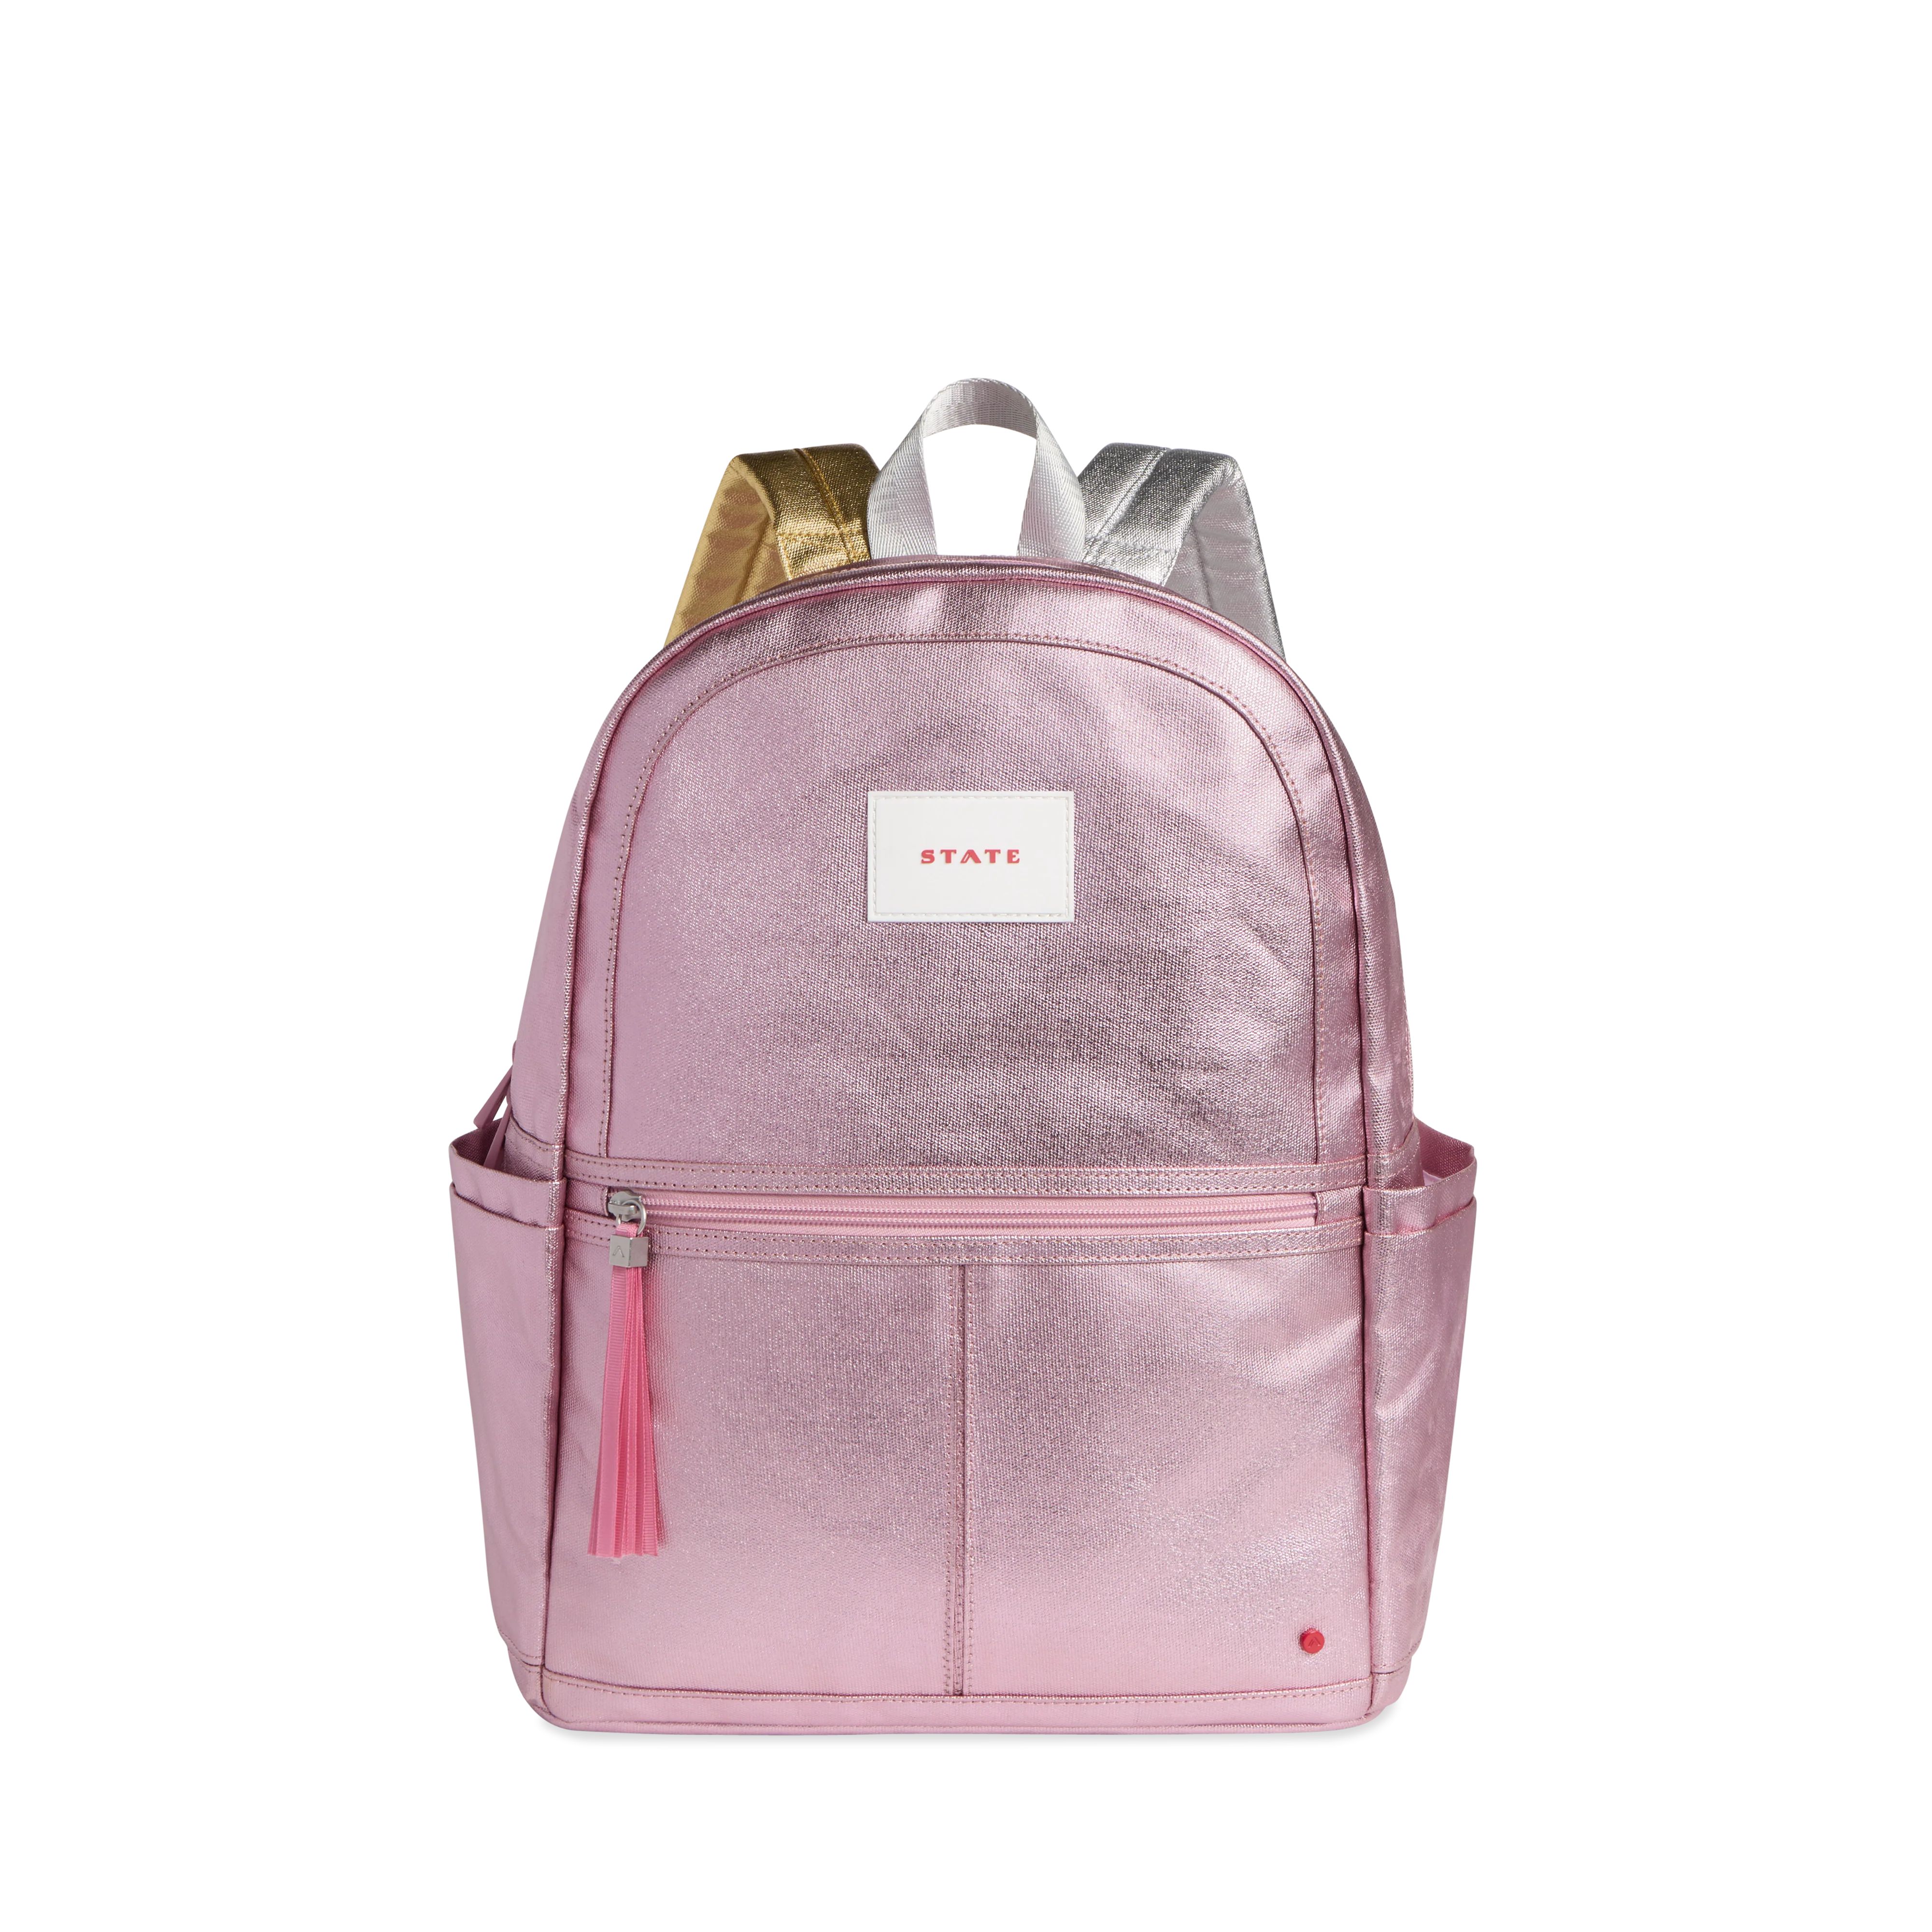 STATE Bags | Kane Kids Double Pocket Backpack Metallic Pink/Silver | STATE Bags